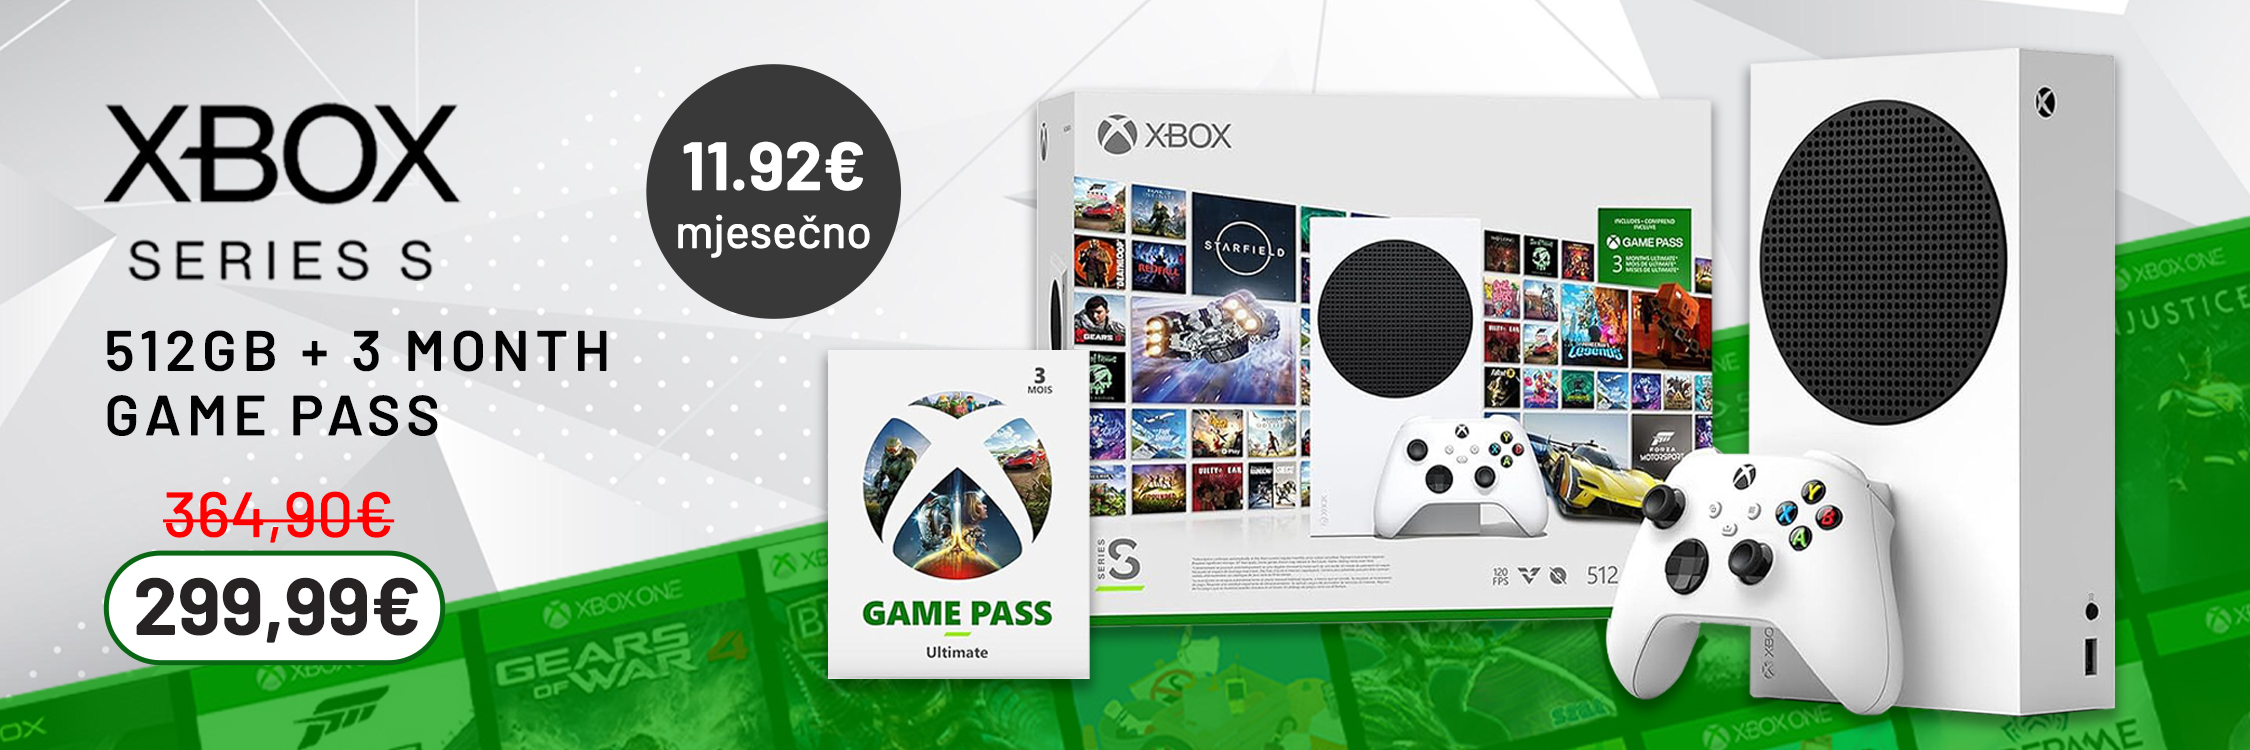 Xbox Series S + 3 Month Game Pass